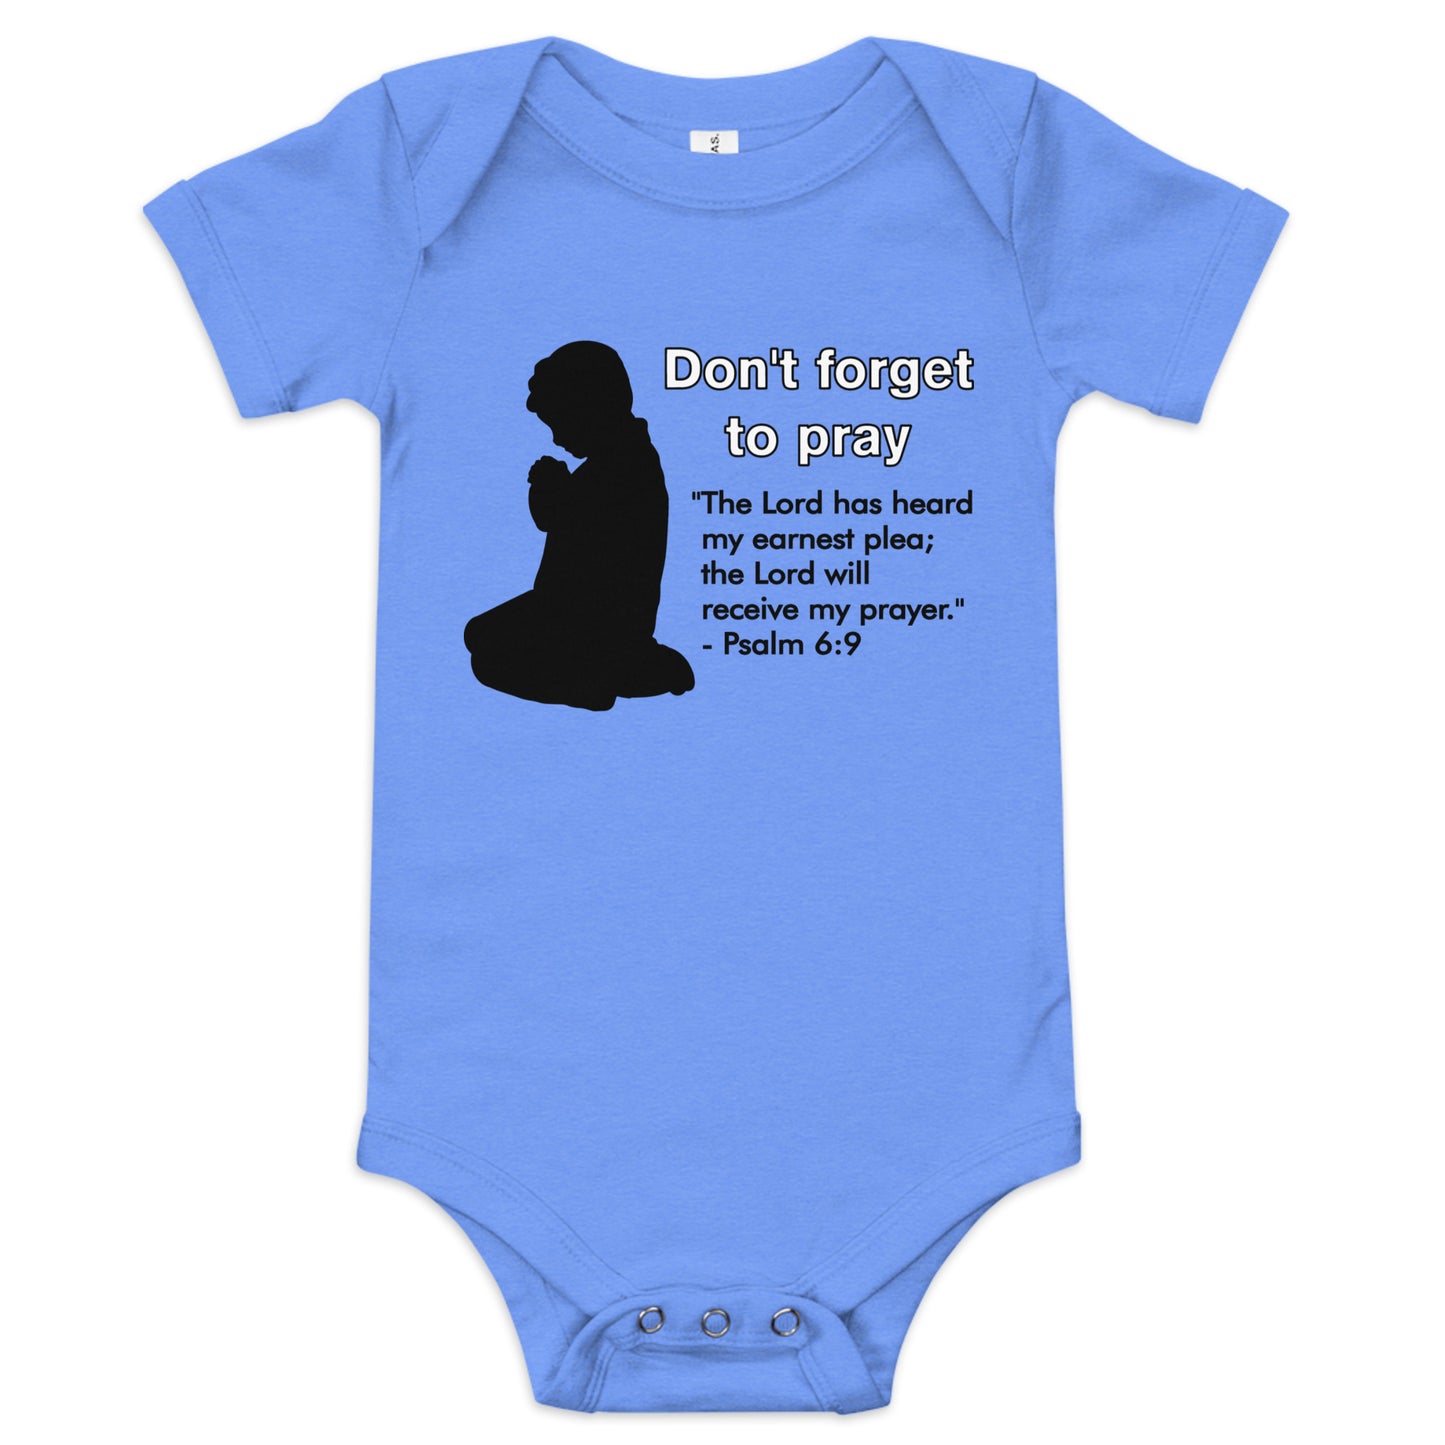 Don't Forget to Pray Infant Bodysuit